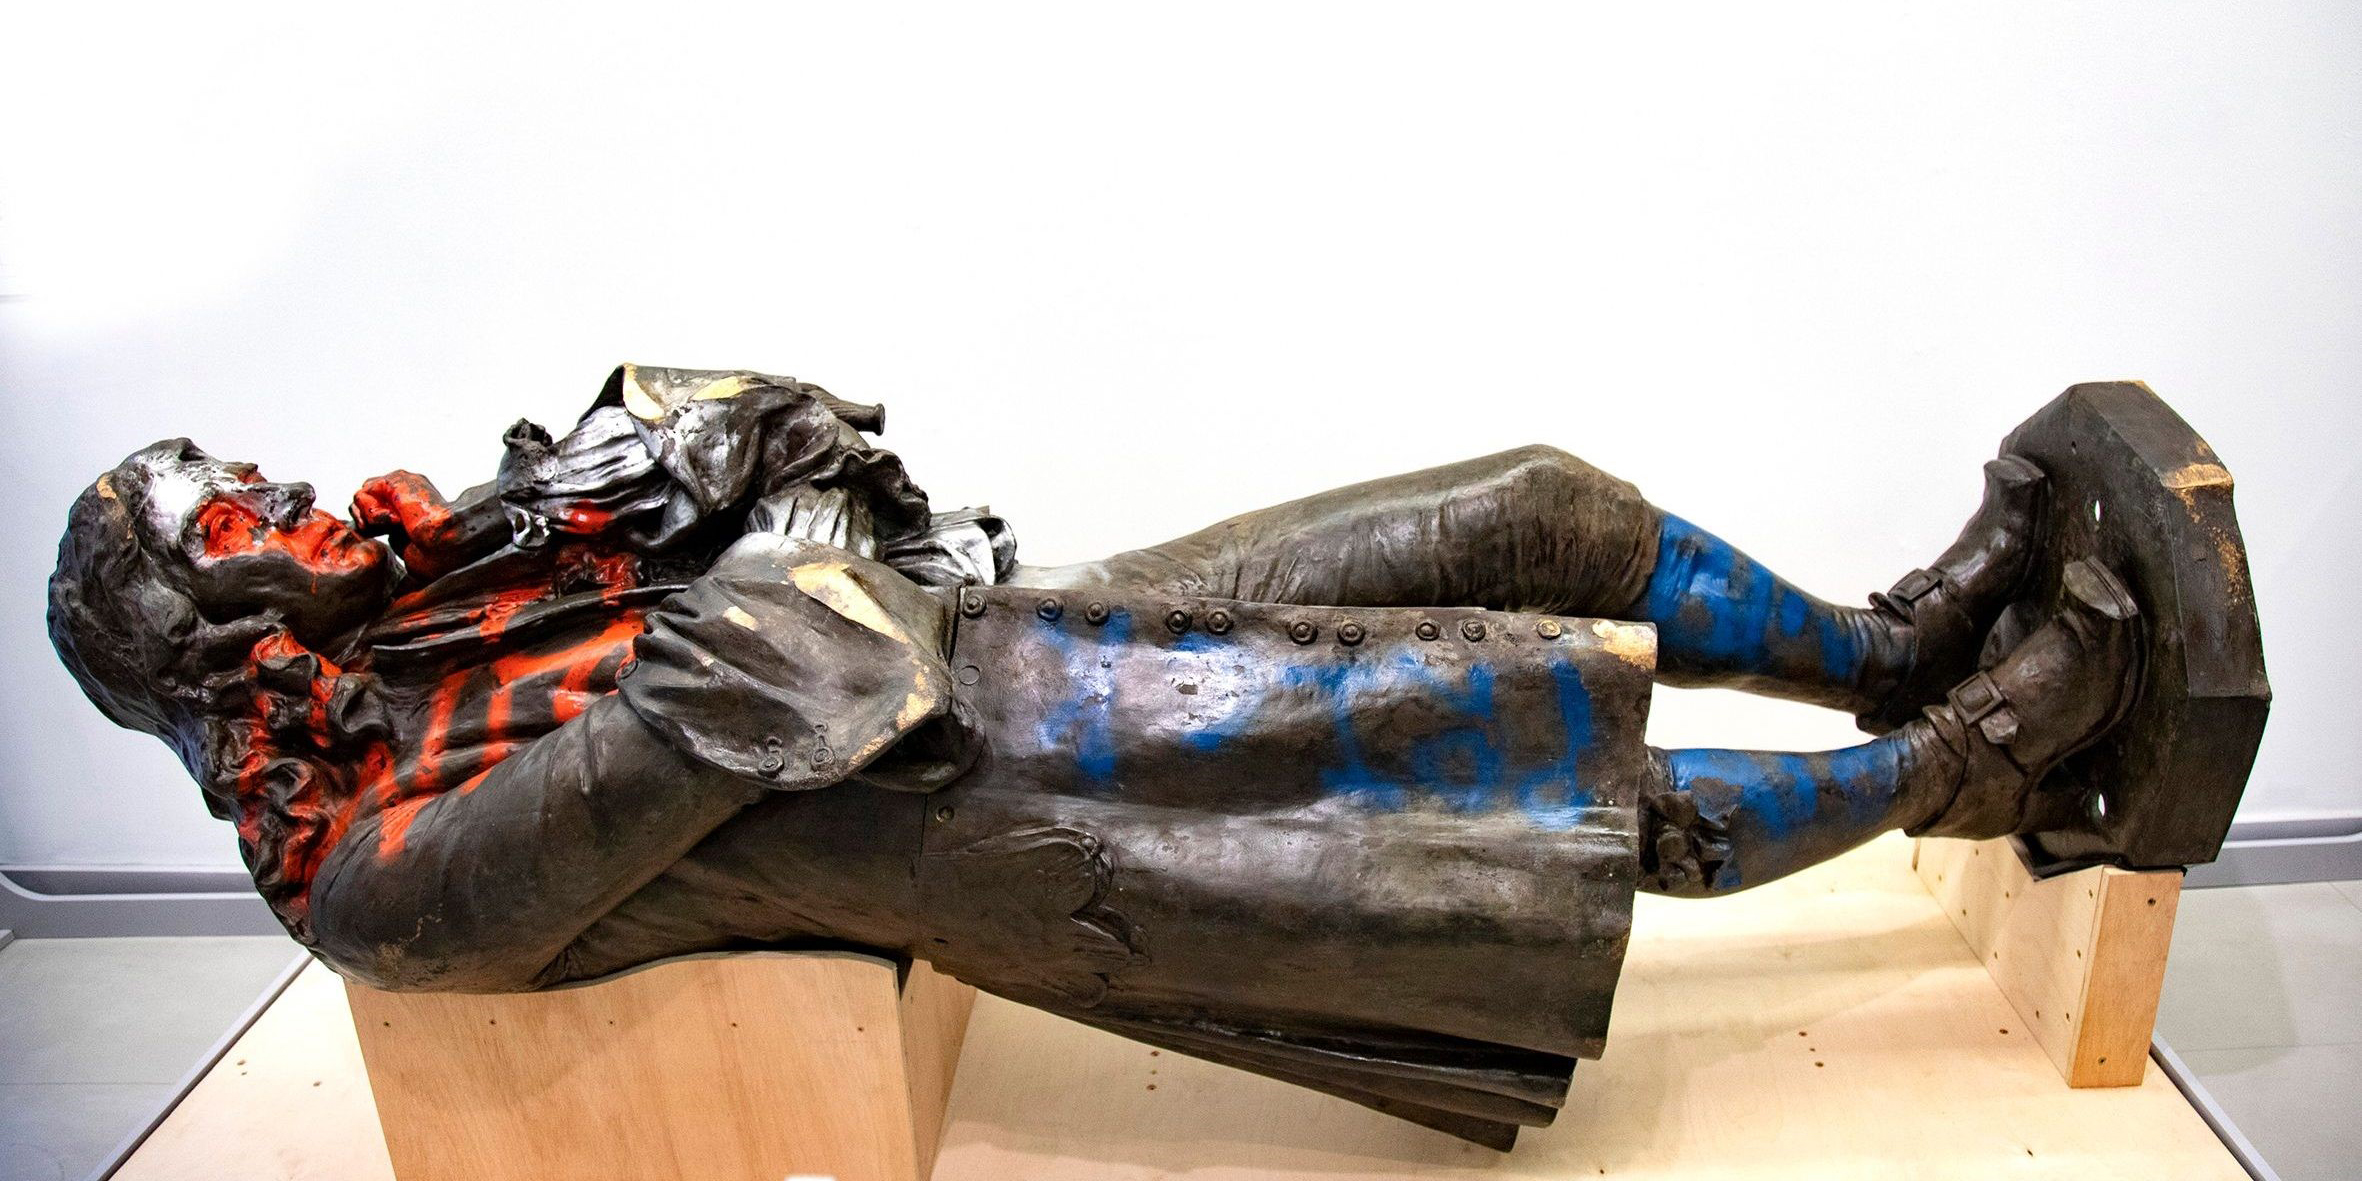 A statue of a man lying down on a museum plinth covered in paint